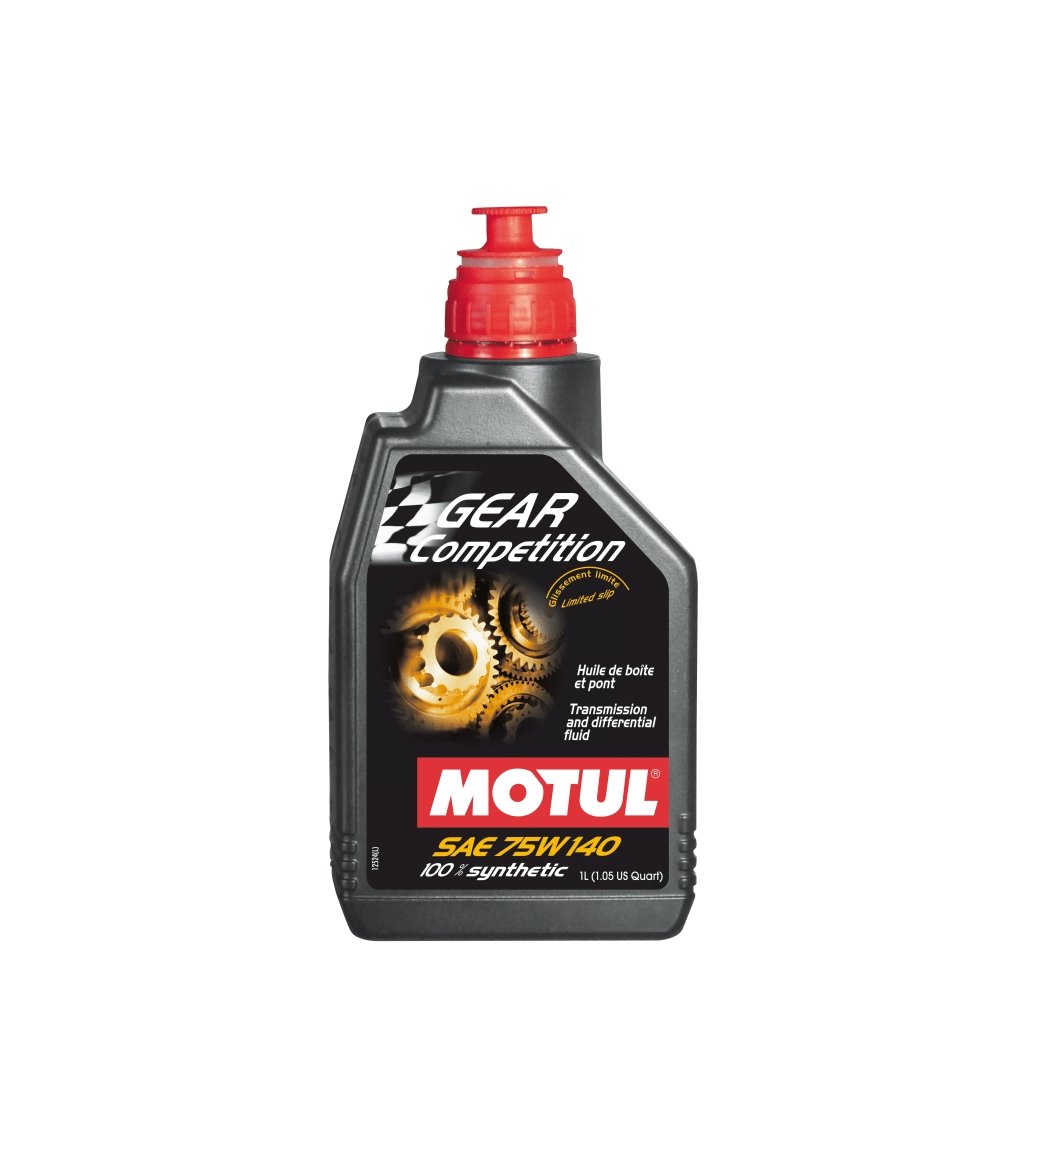 Motul Gear Competition 75W140 Fully Synthetic Transmission Fluid - 1L - Dirty Racing Products